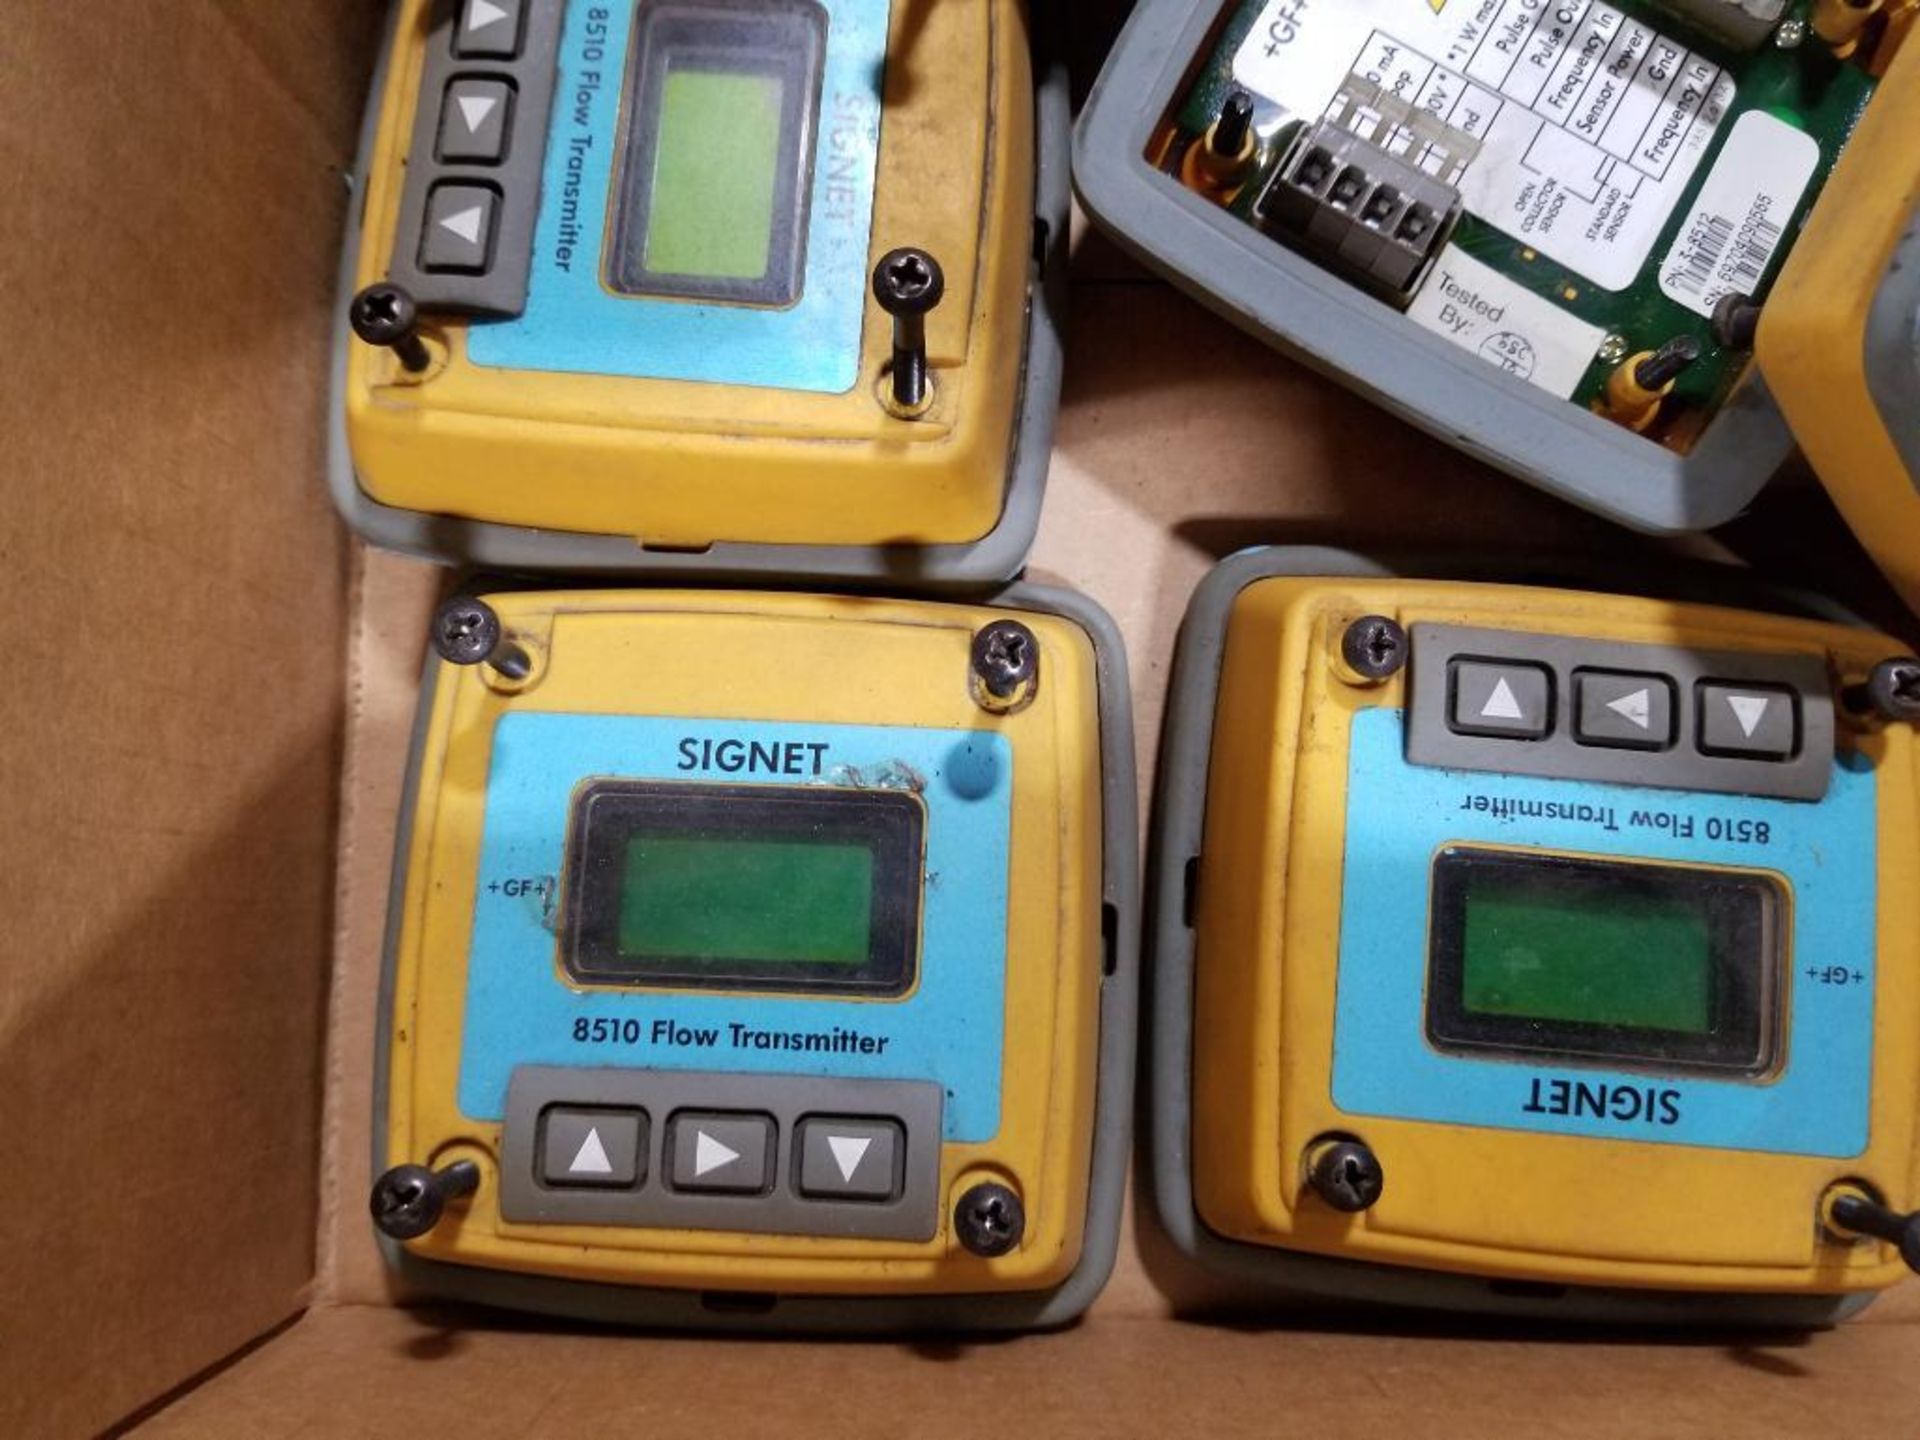 Signet 8510 Flow transmitter controllers. - Image 4 of 6